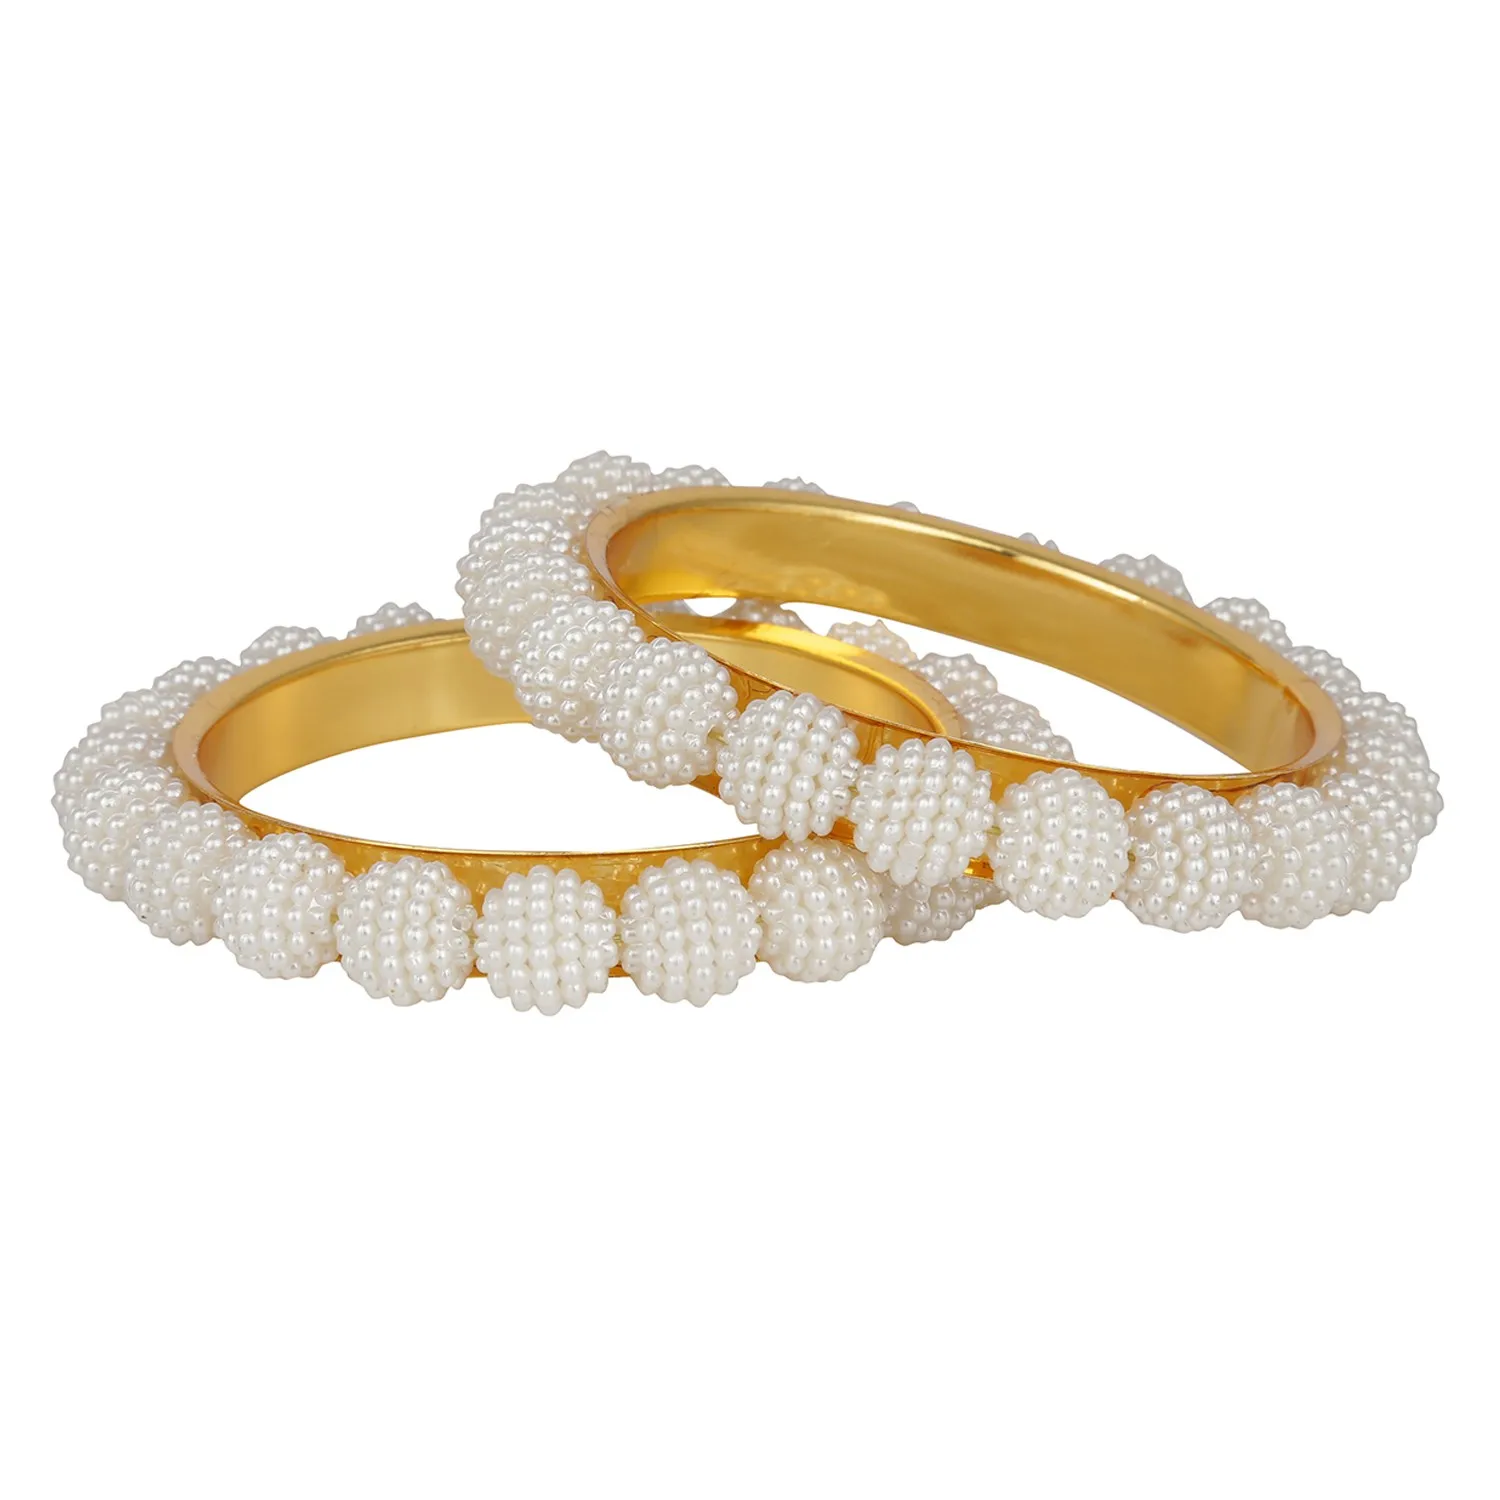 Details about   Indian Bollywood New Design Fashion Girls Ethnic Pearl Bangle Bracelets 